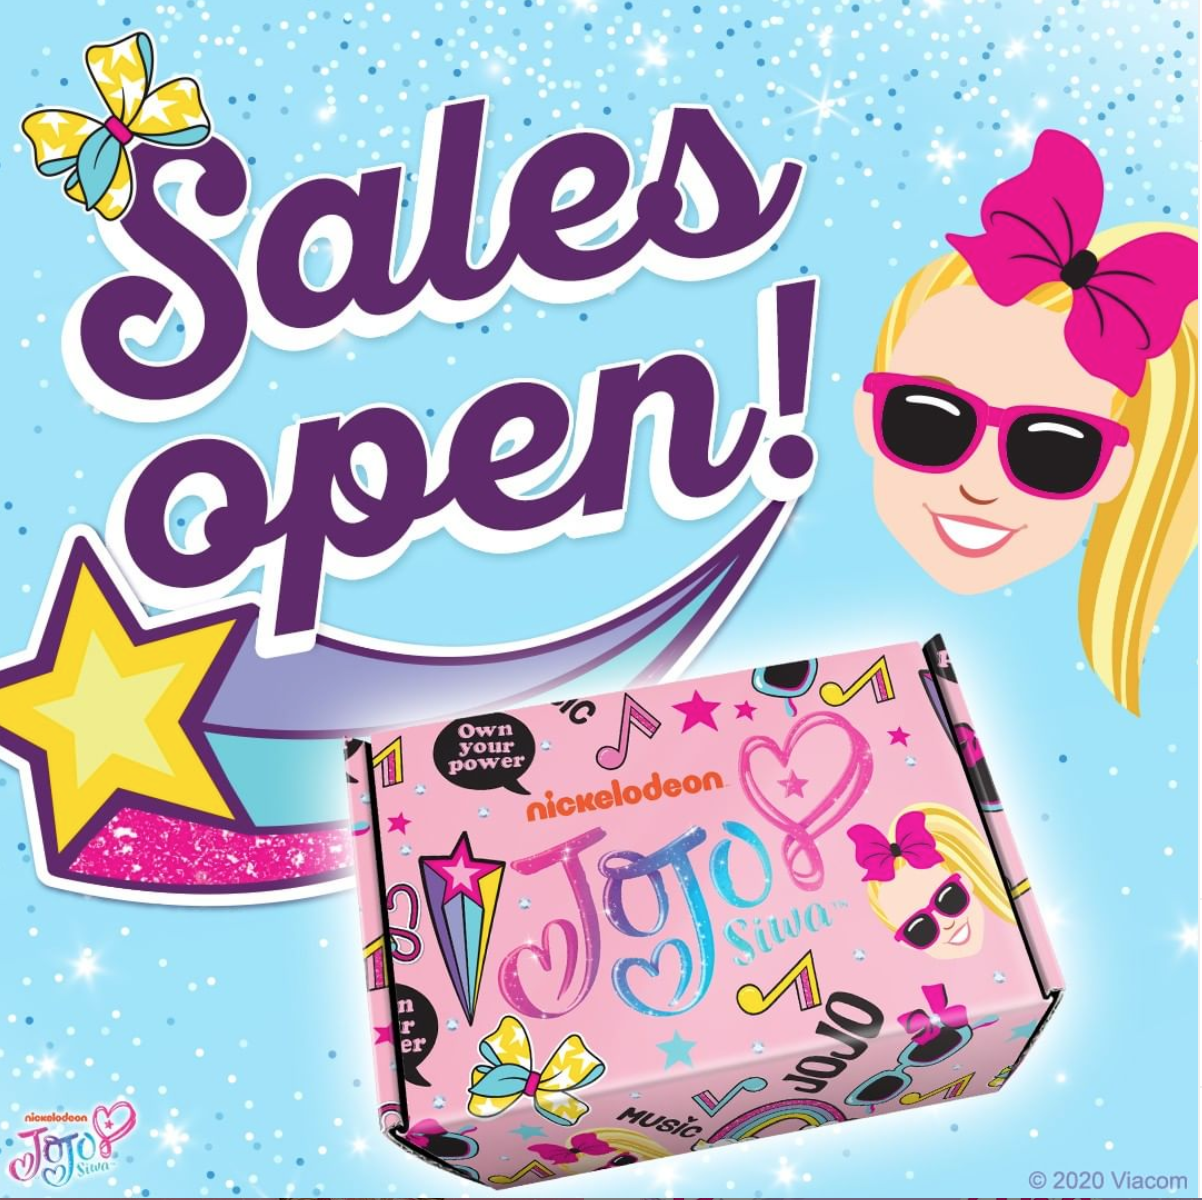 The JoJo Siwa Box Spring 2020 Boxes Available Now!